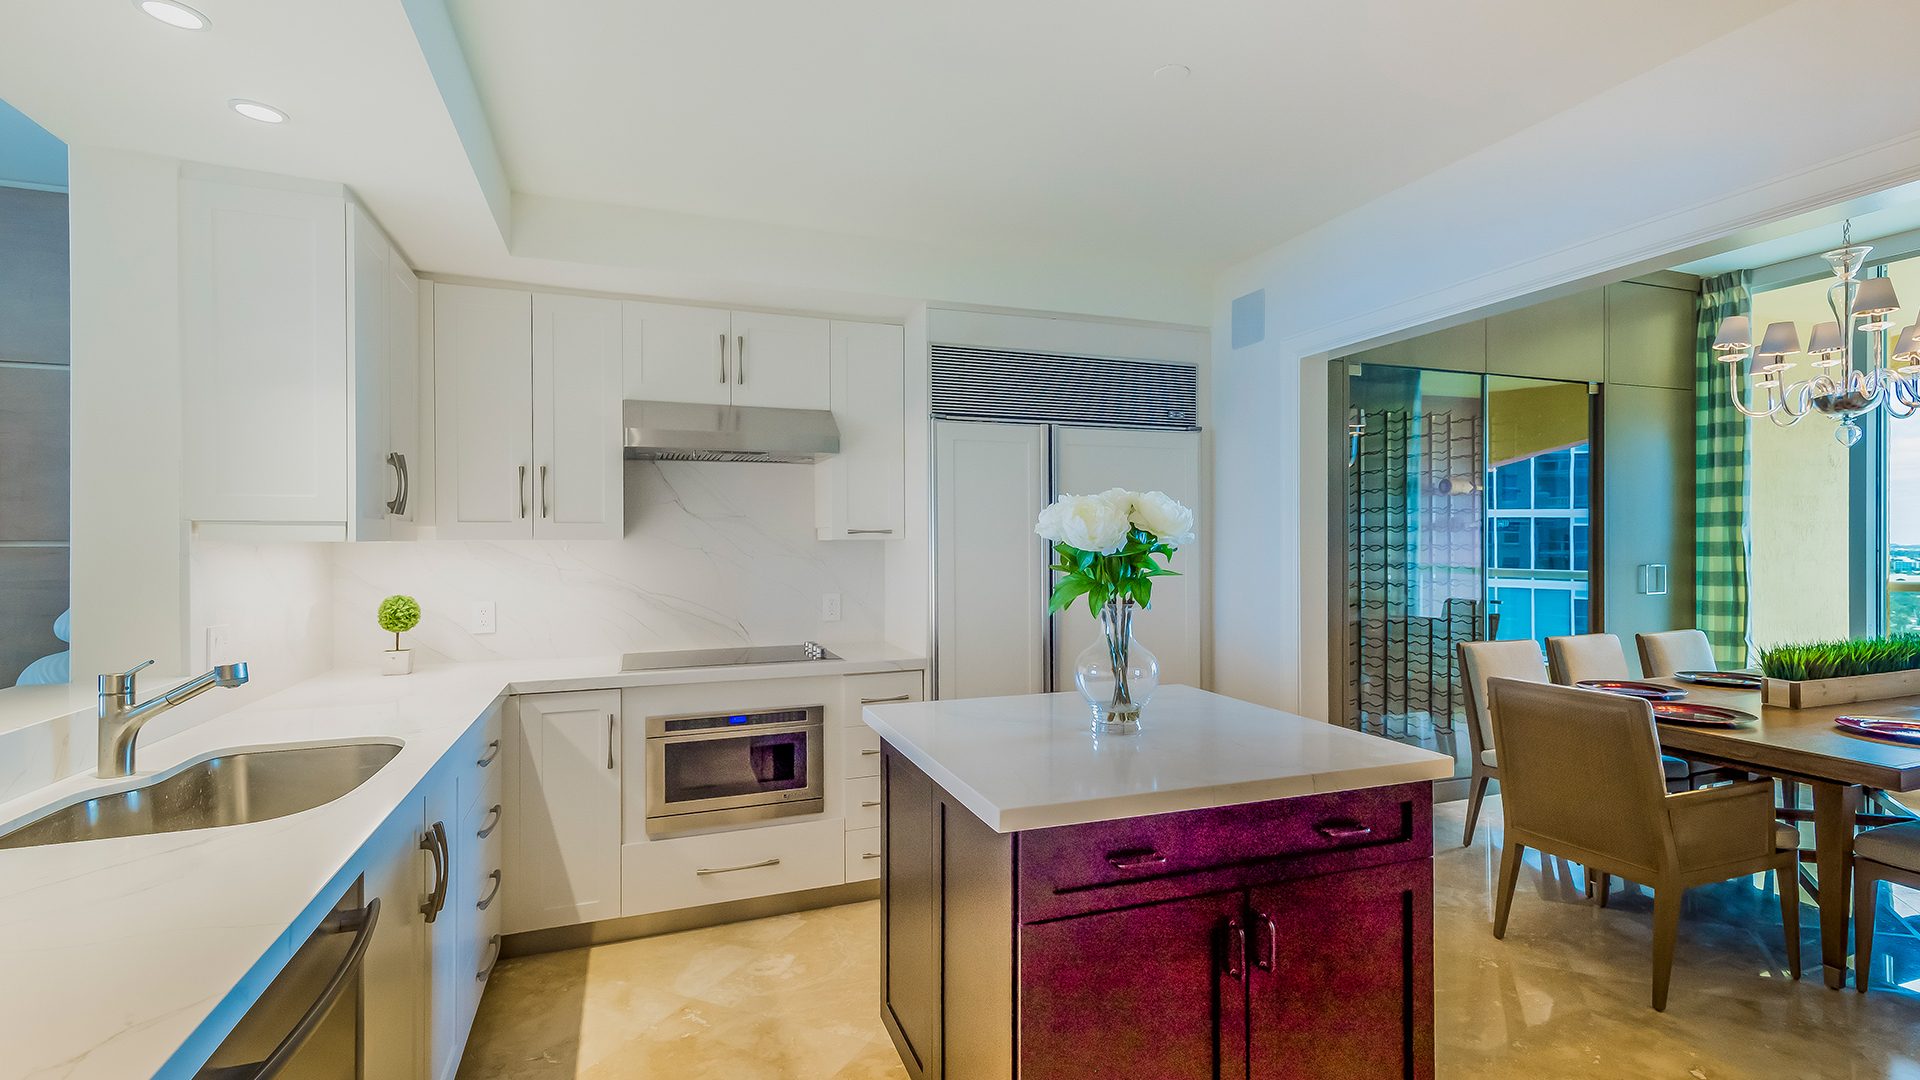 Residence 24A, Tower II at The Palms, Luxury Oceanfront Condominiums Fort Lauderdale, Florida 33305